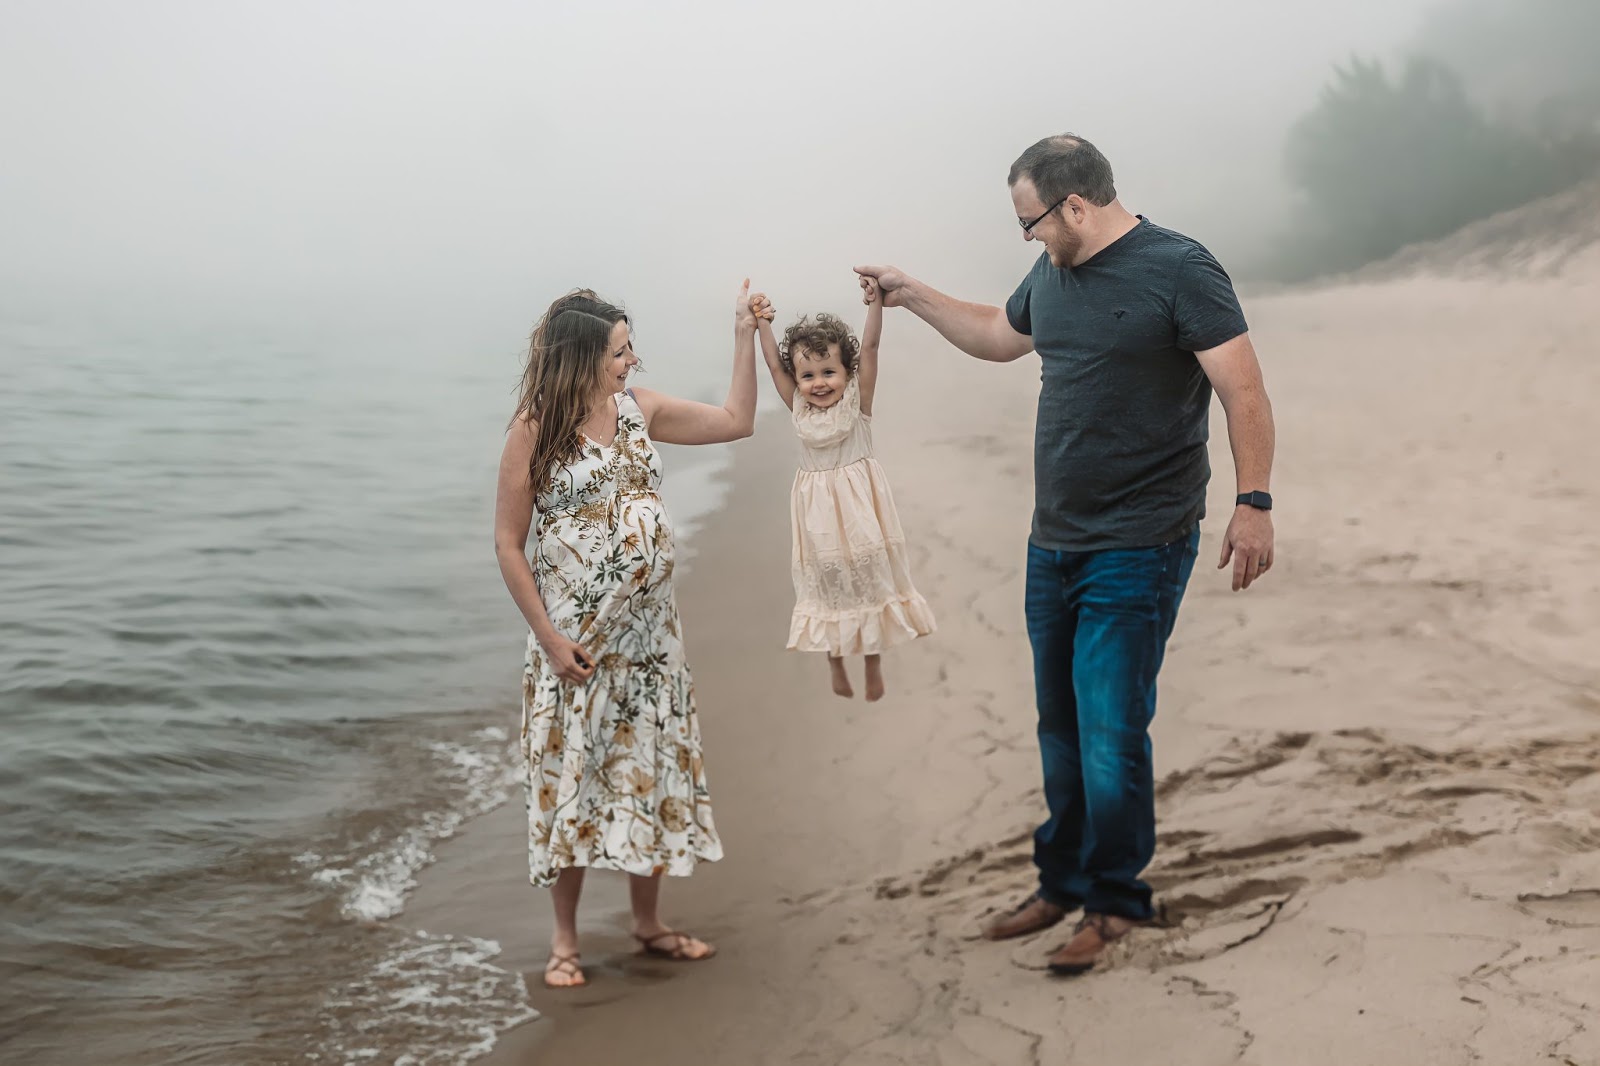 Love; Photography | Family Photography | Grand Rapids